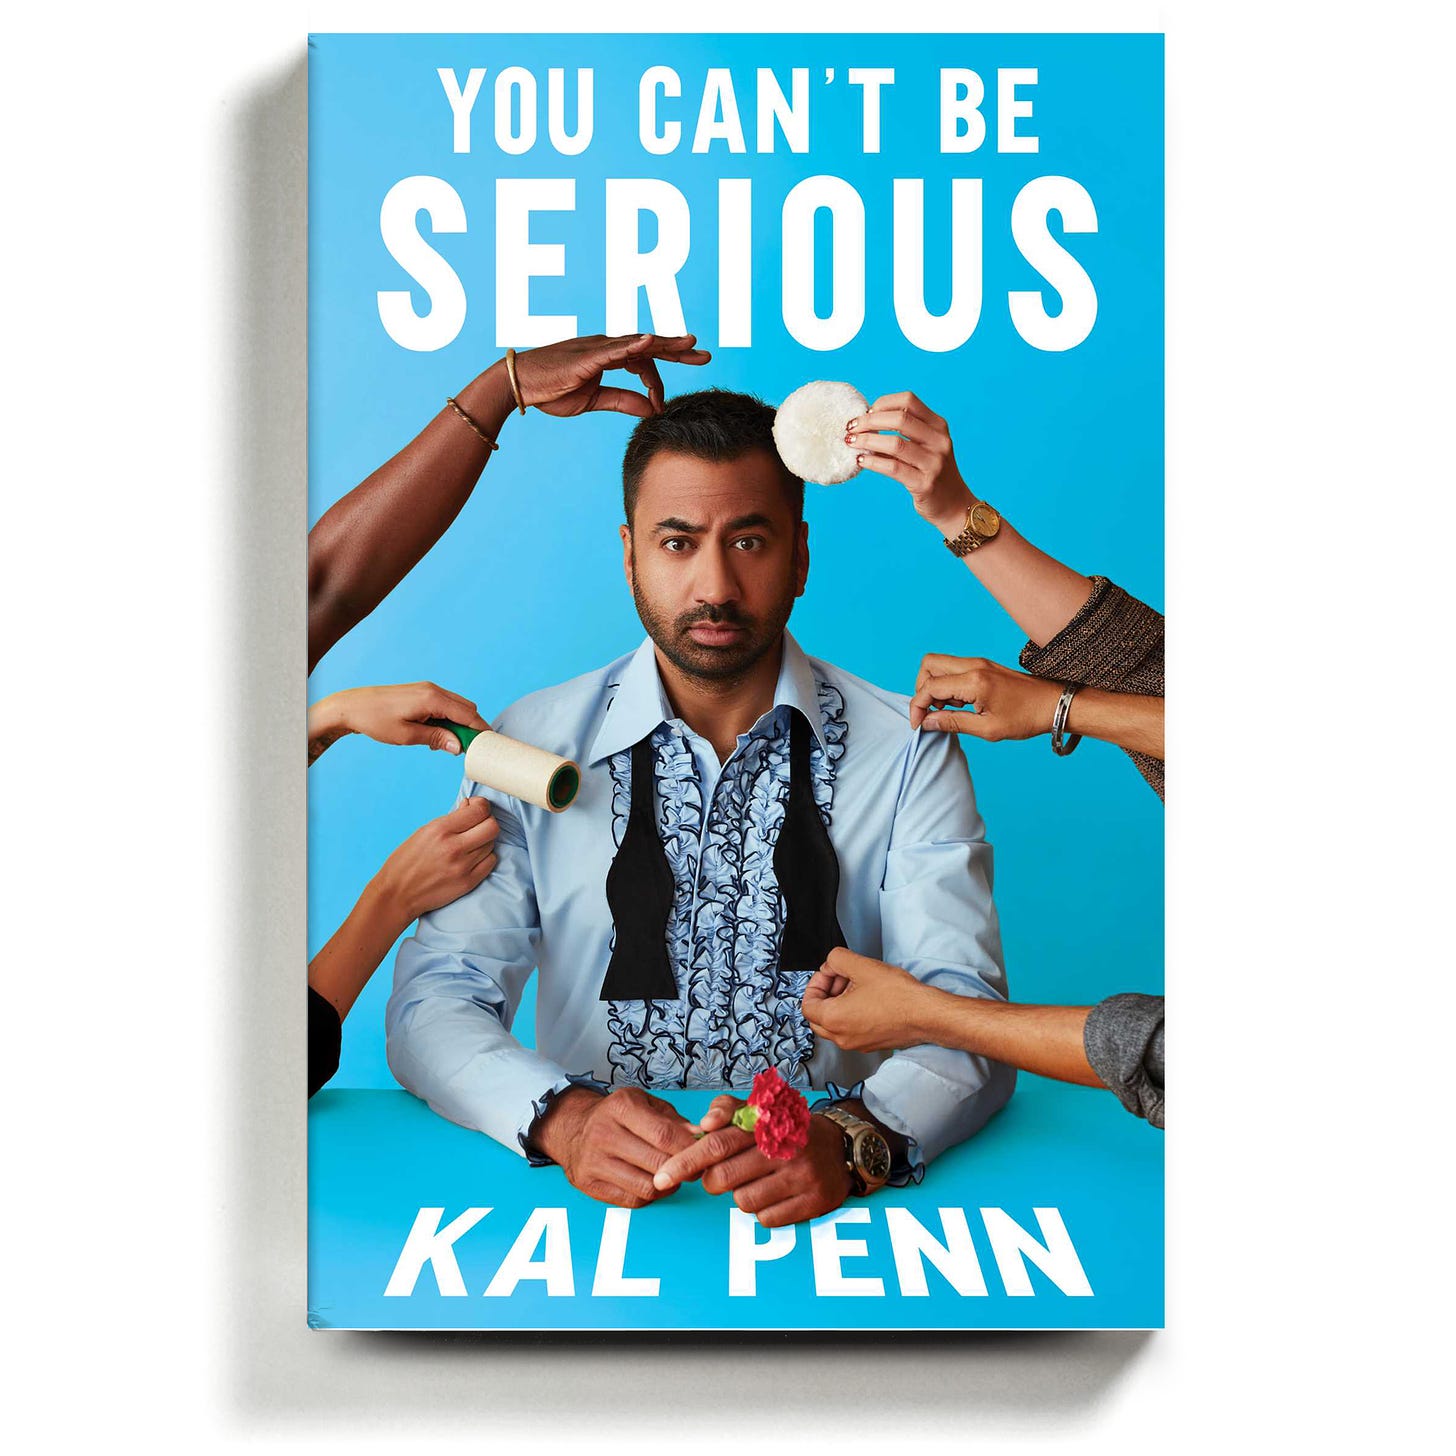 Kal Penn on His Book: &#39;Maybe I Do Have a Story to Tell&#39; - The New York Times